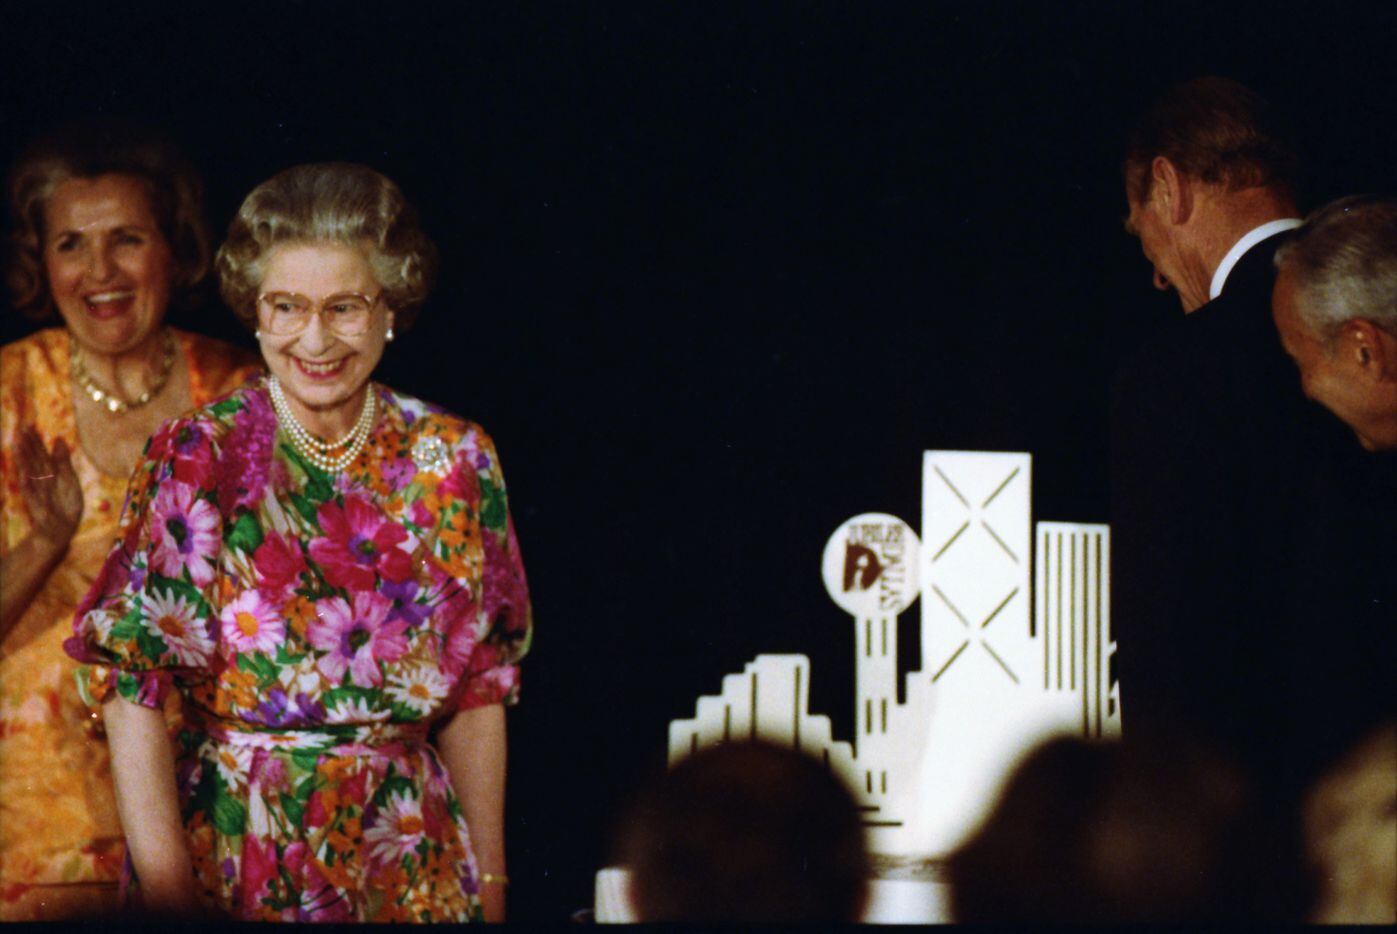 Dallas Mayor Annette Strauss looks on as Queen Elizabeth II and Prince Philip prepare to cut...